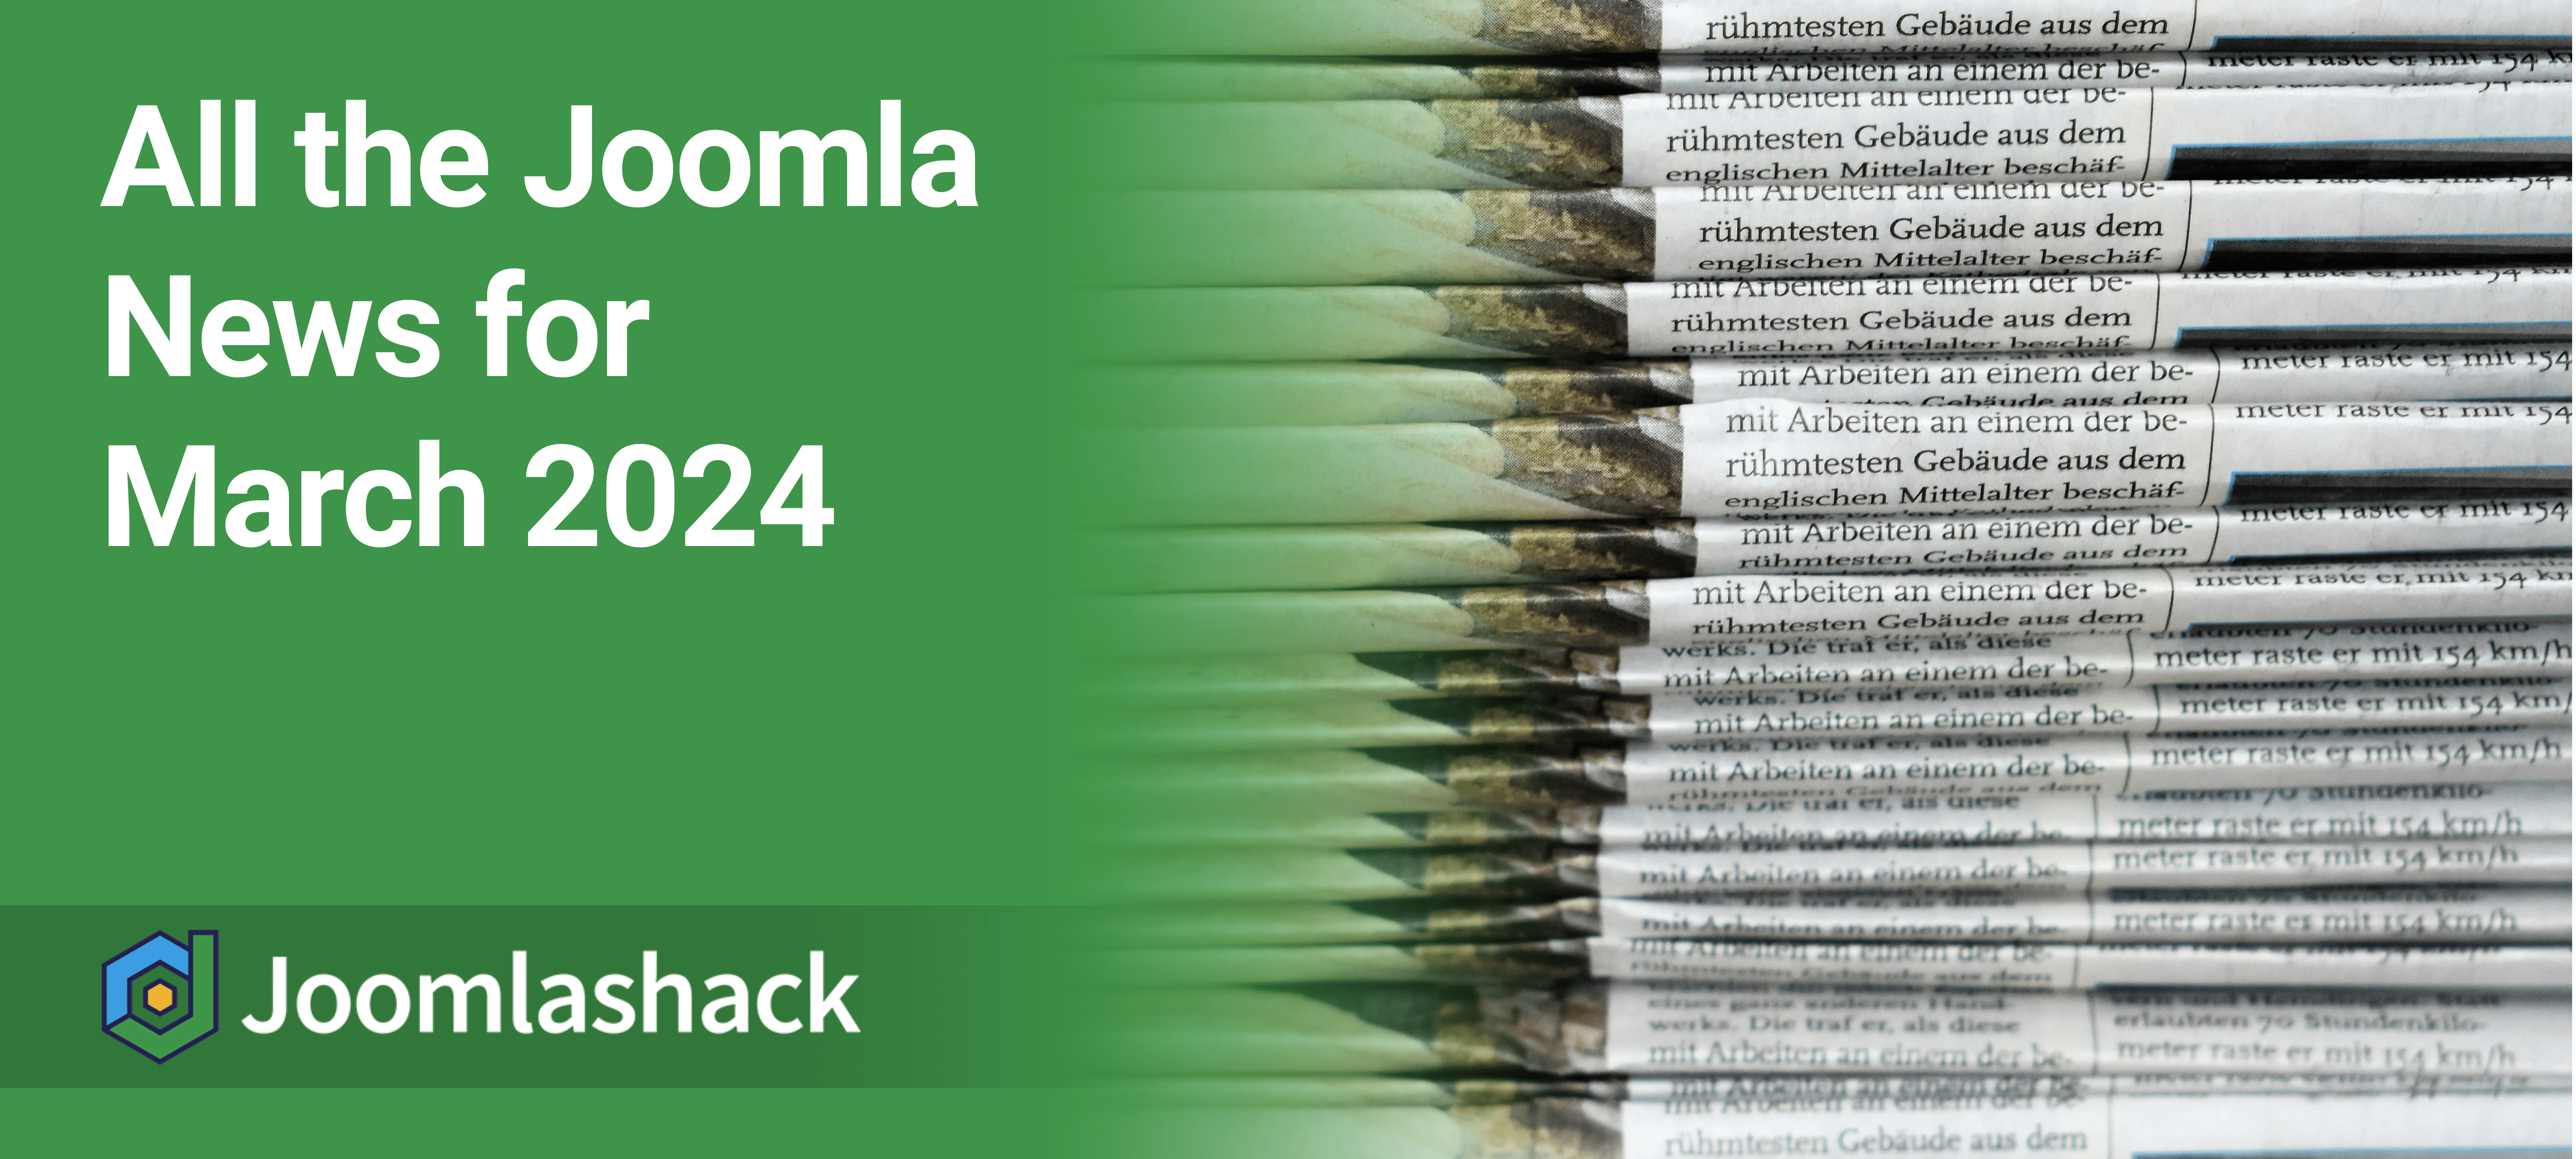 All the Joomla News for March 2024